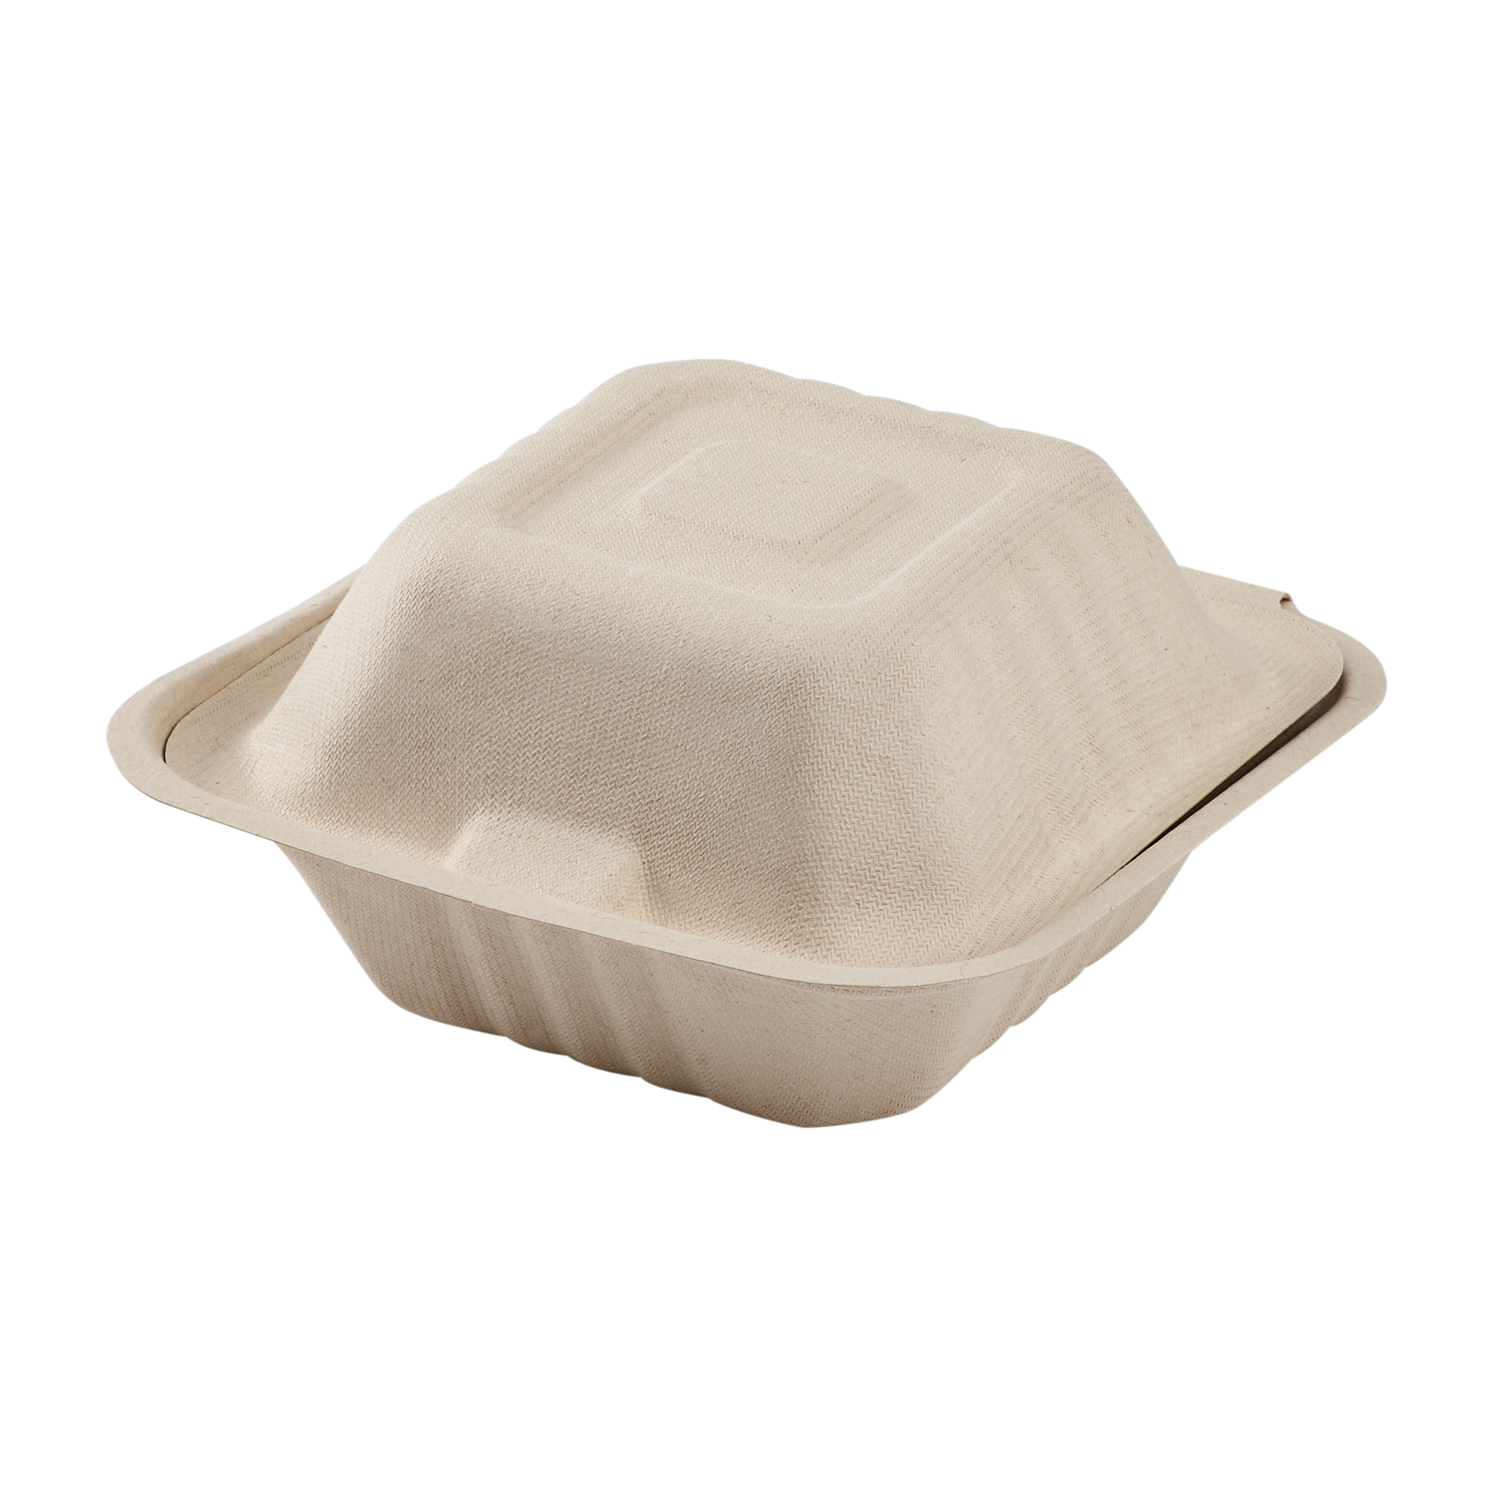 Karat Earth 6''x6'' PFAS Free Compostable Bagasse Hinged Containers, Natural - 500 pcs